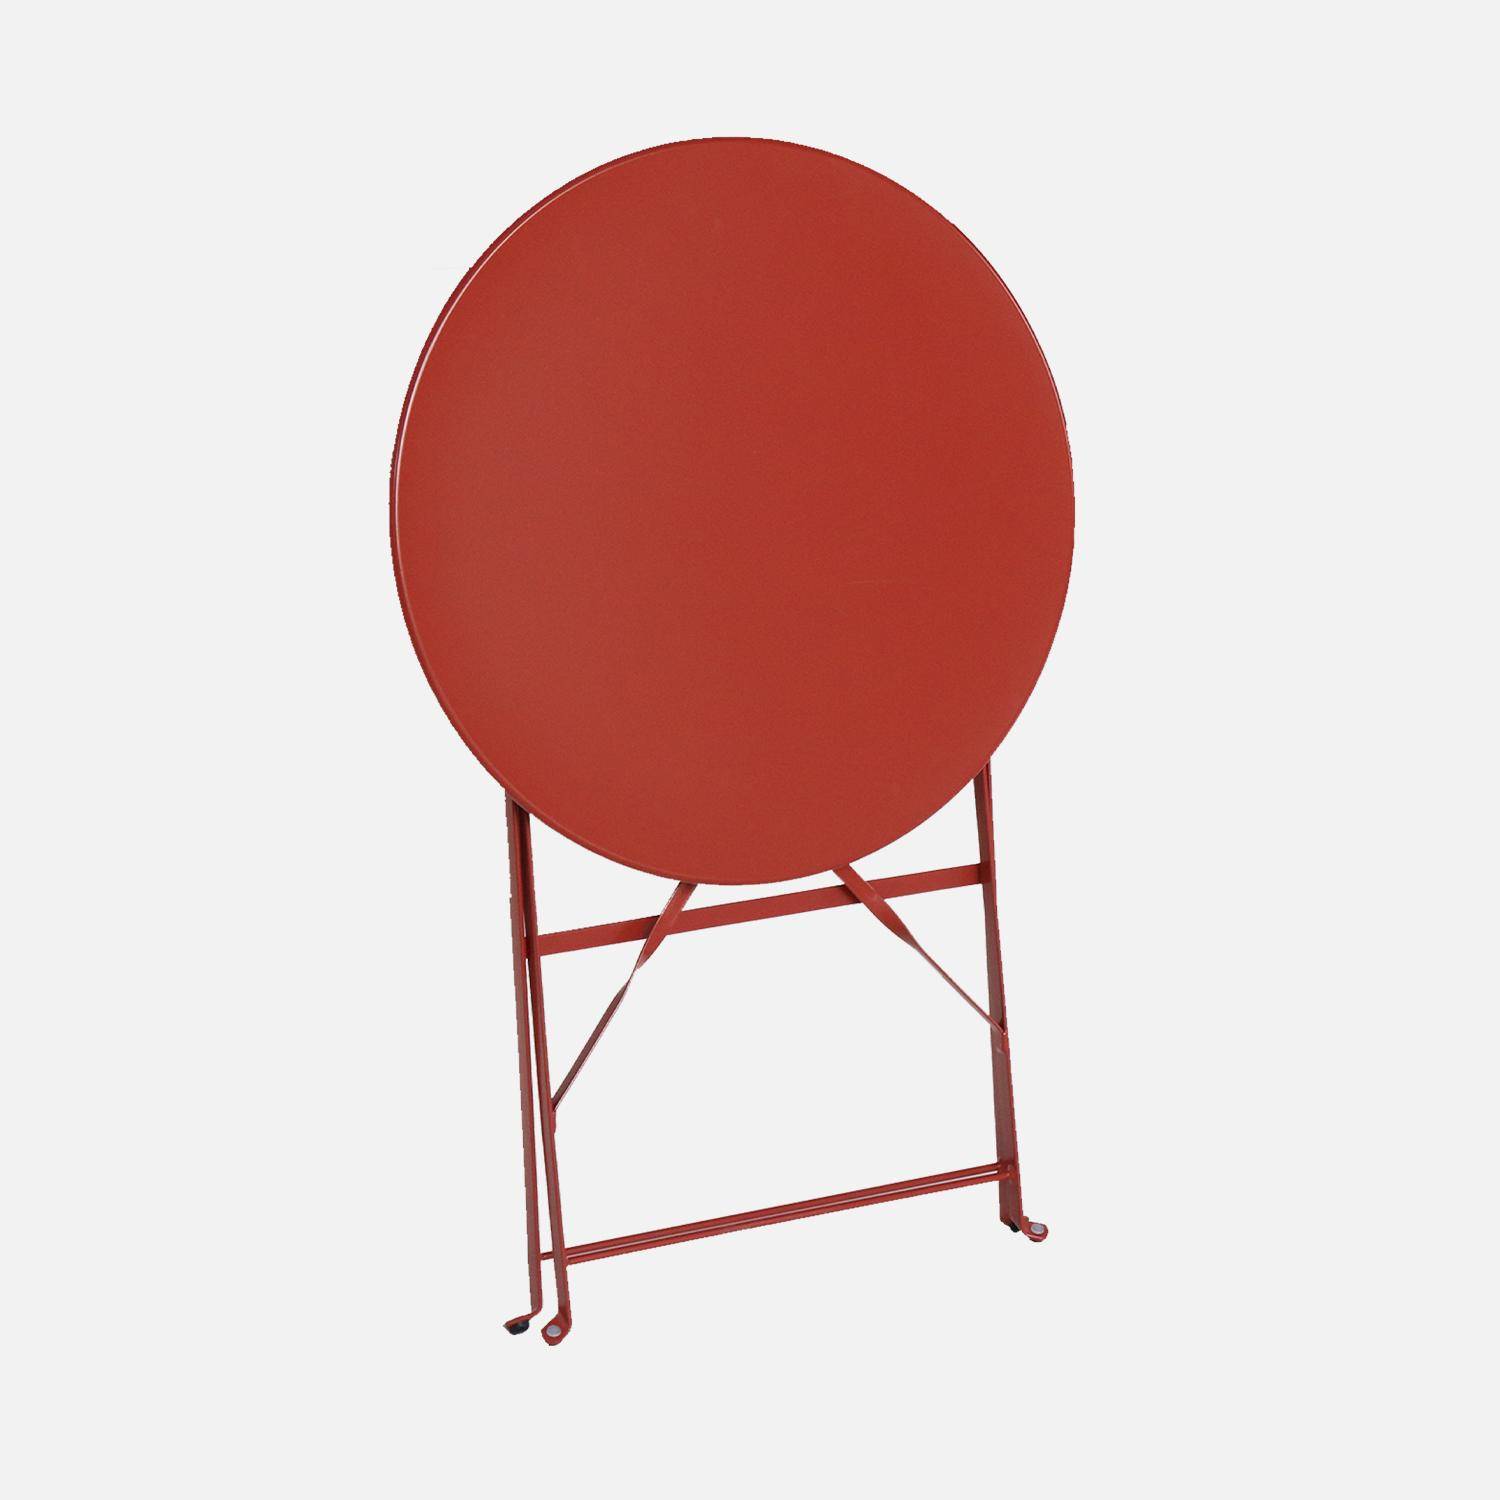 Foldable bistro garden table - Round Emilia terracota - Round table Ø60cm, thermo-lacquered steel,sweeek,Photo4